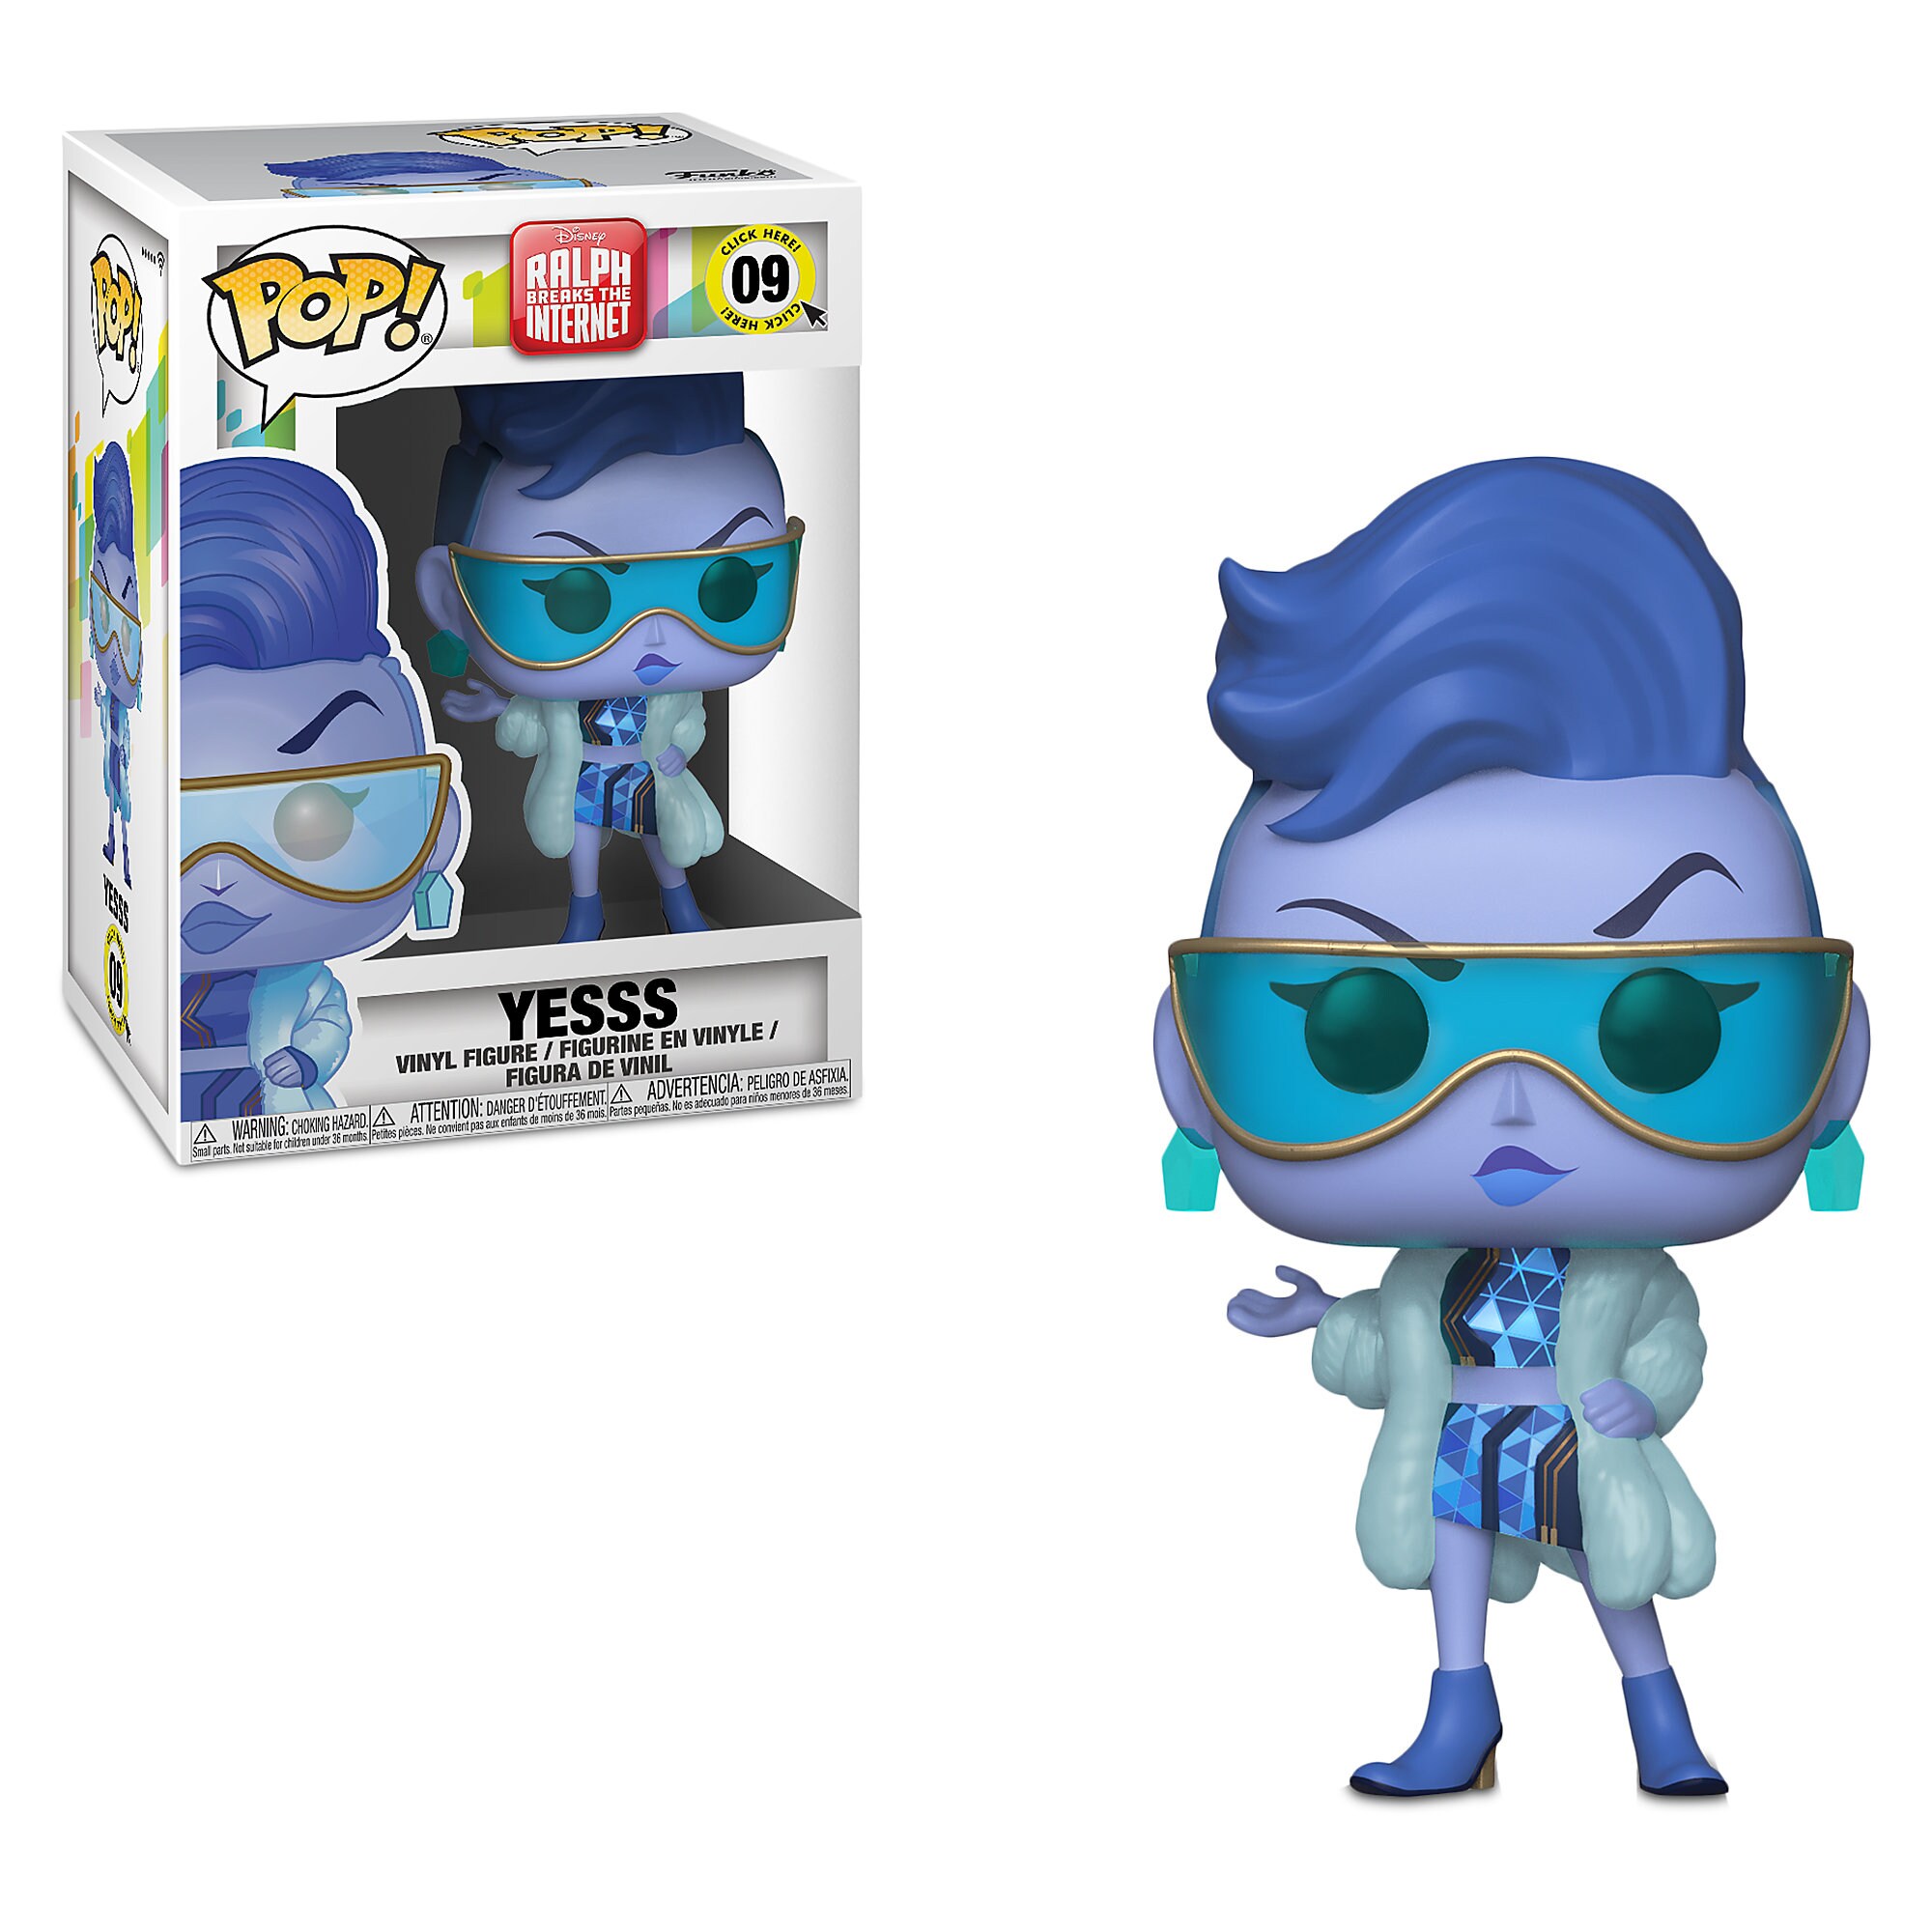 Yesss Pop! Vinyl Figure by Funko - Ralph Breaks the Internet - Limited Chase Edition